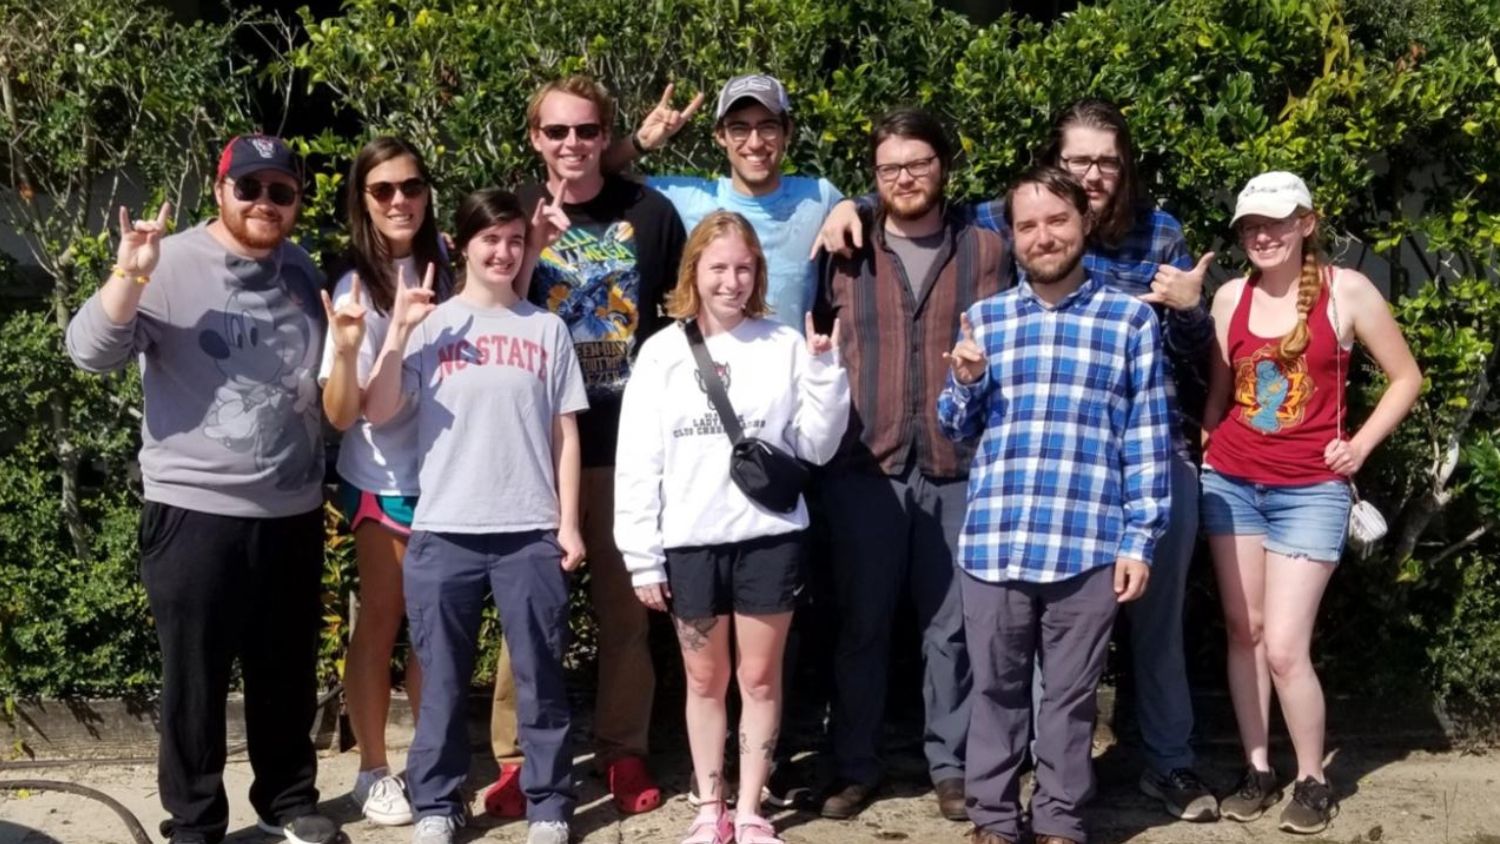 NC State Horticulture Sciences Graduate Student Association members pose as a group